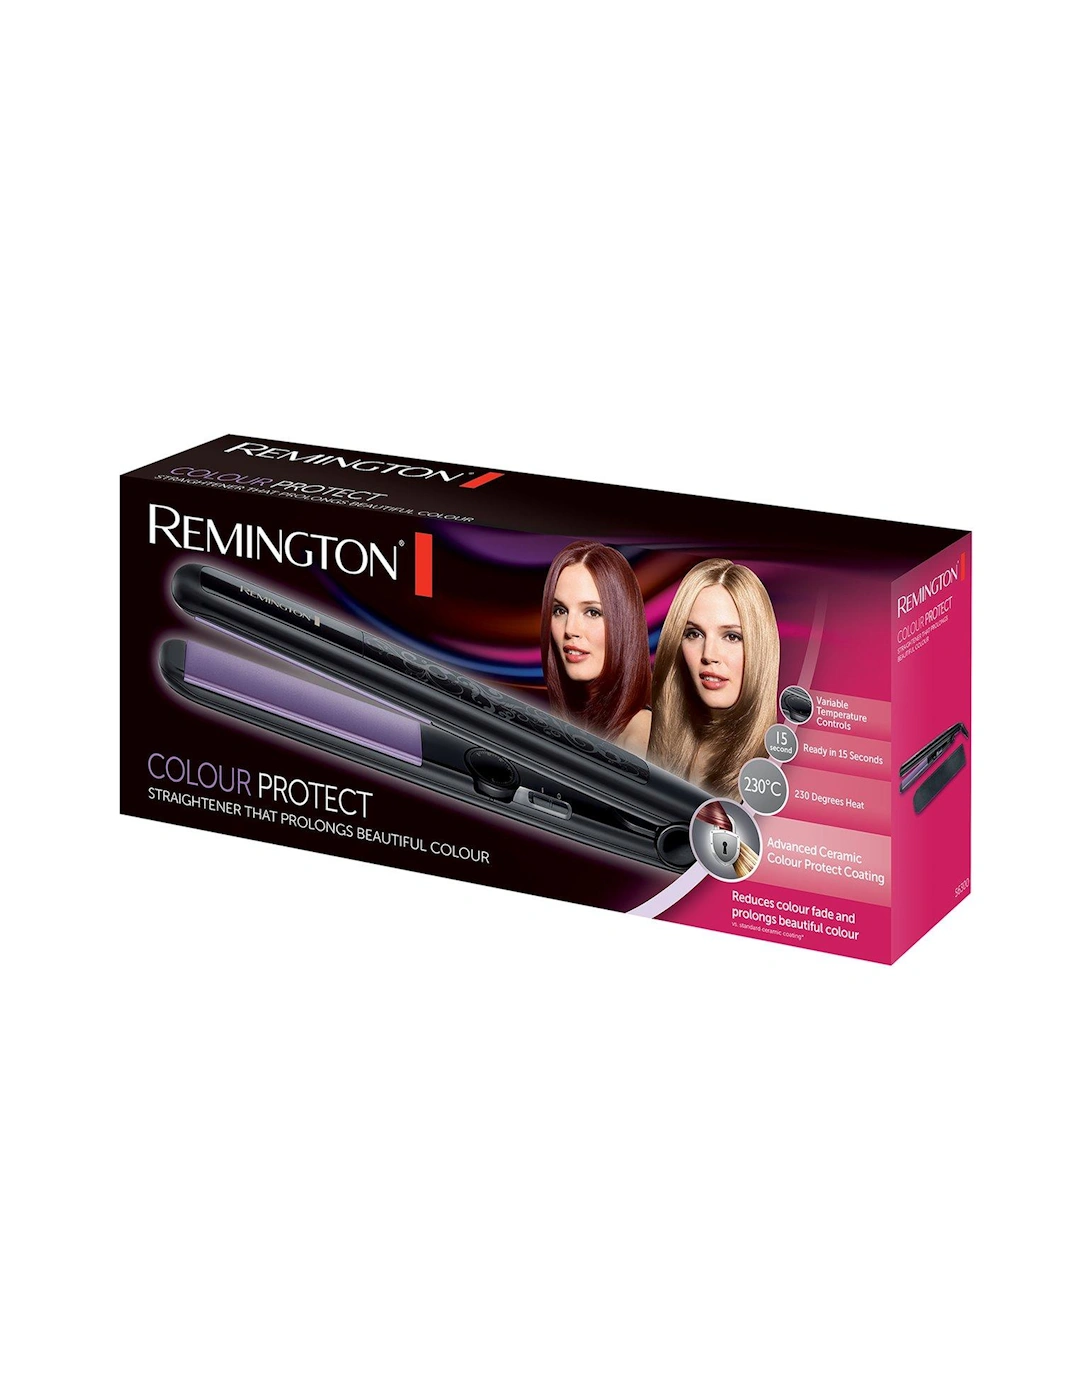 Colour Protect Hair Straightener - S6300